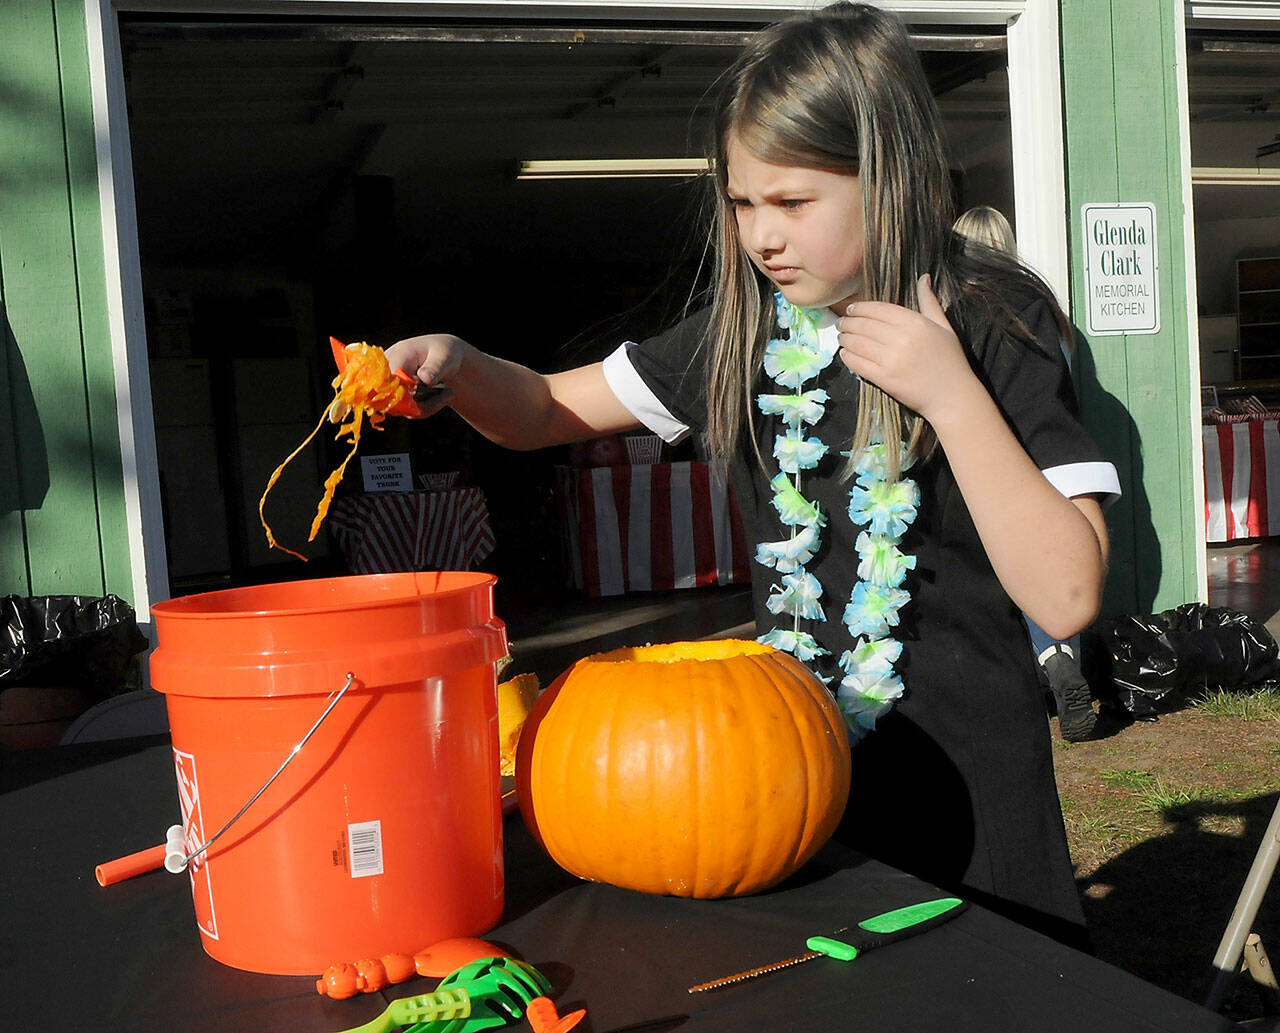 Daria O’Neill, 9, of Sequim empties the innards of a pumpkin at Sequim Prairie Grange Fall Festival & Trunk or Treat on Saturday at the grange hall and grounds near Carlsborg. The festival featured pumpkin carving, children’s games and treats handed out to costumed youngsters. (Keith Thorpe/Peninsula Daily News)